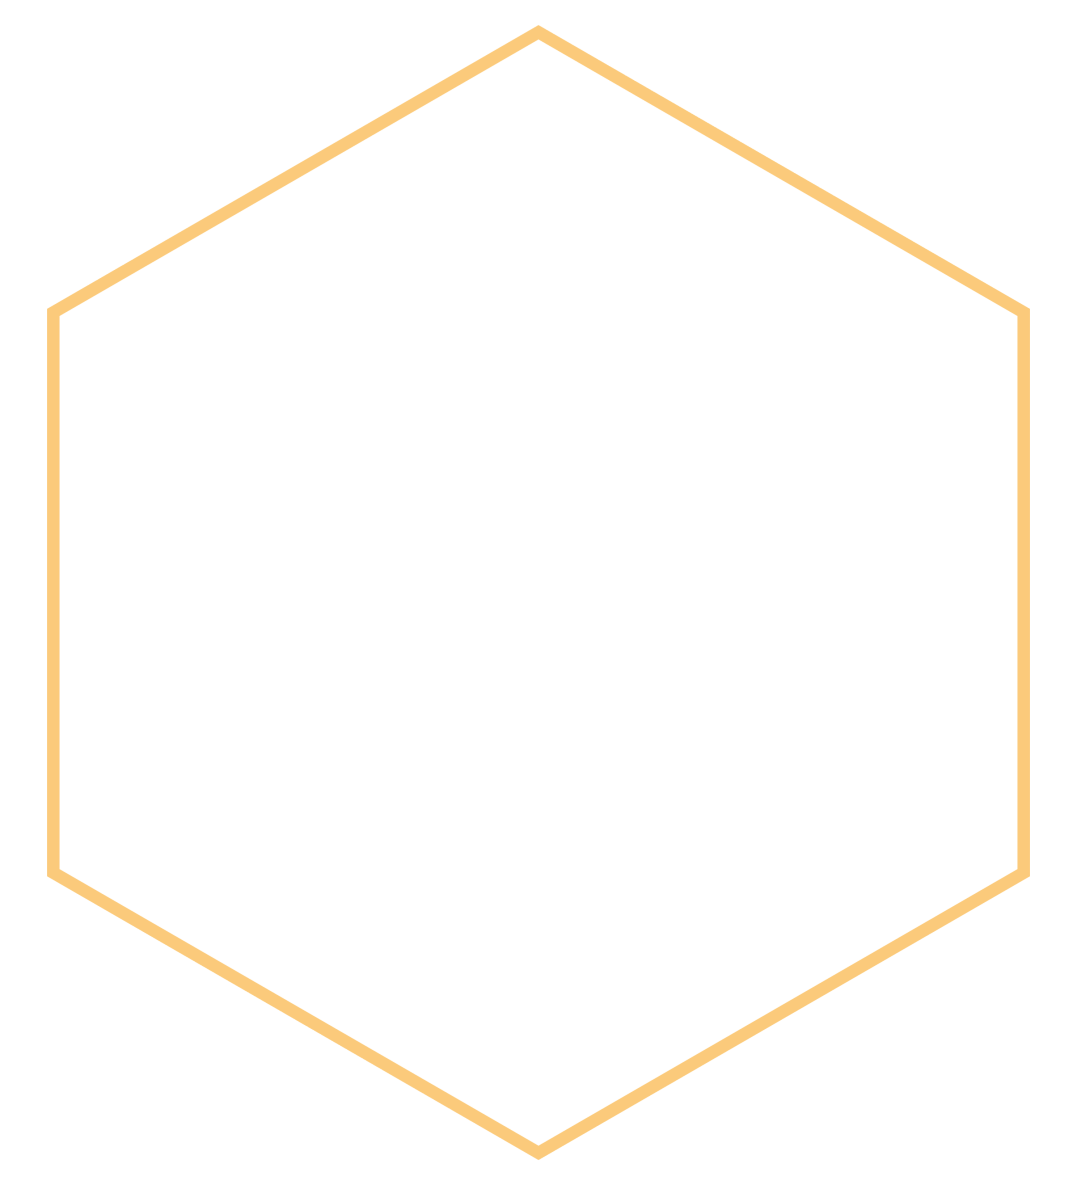 Leveraging the skills, knowledge, and experience of its team, Defendable Technologies conducts rapid and effective TSI programs of work for highly-complex business challenges.​